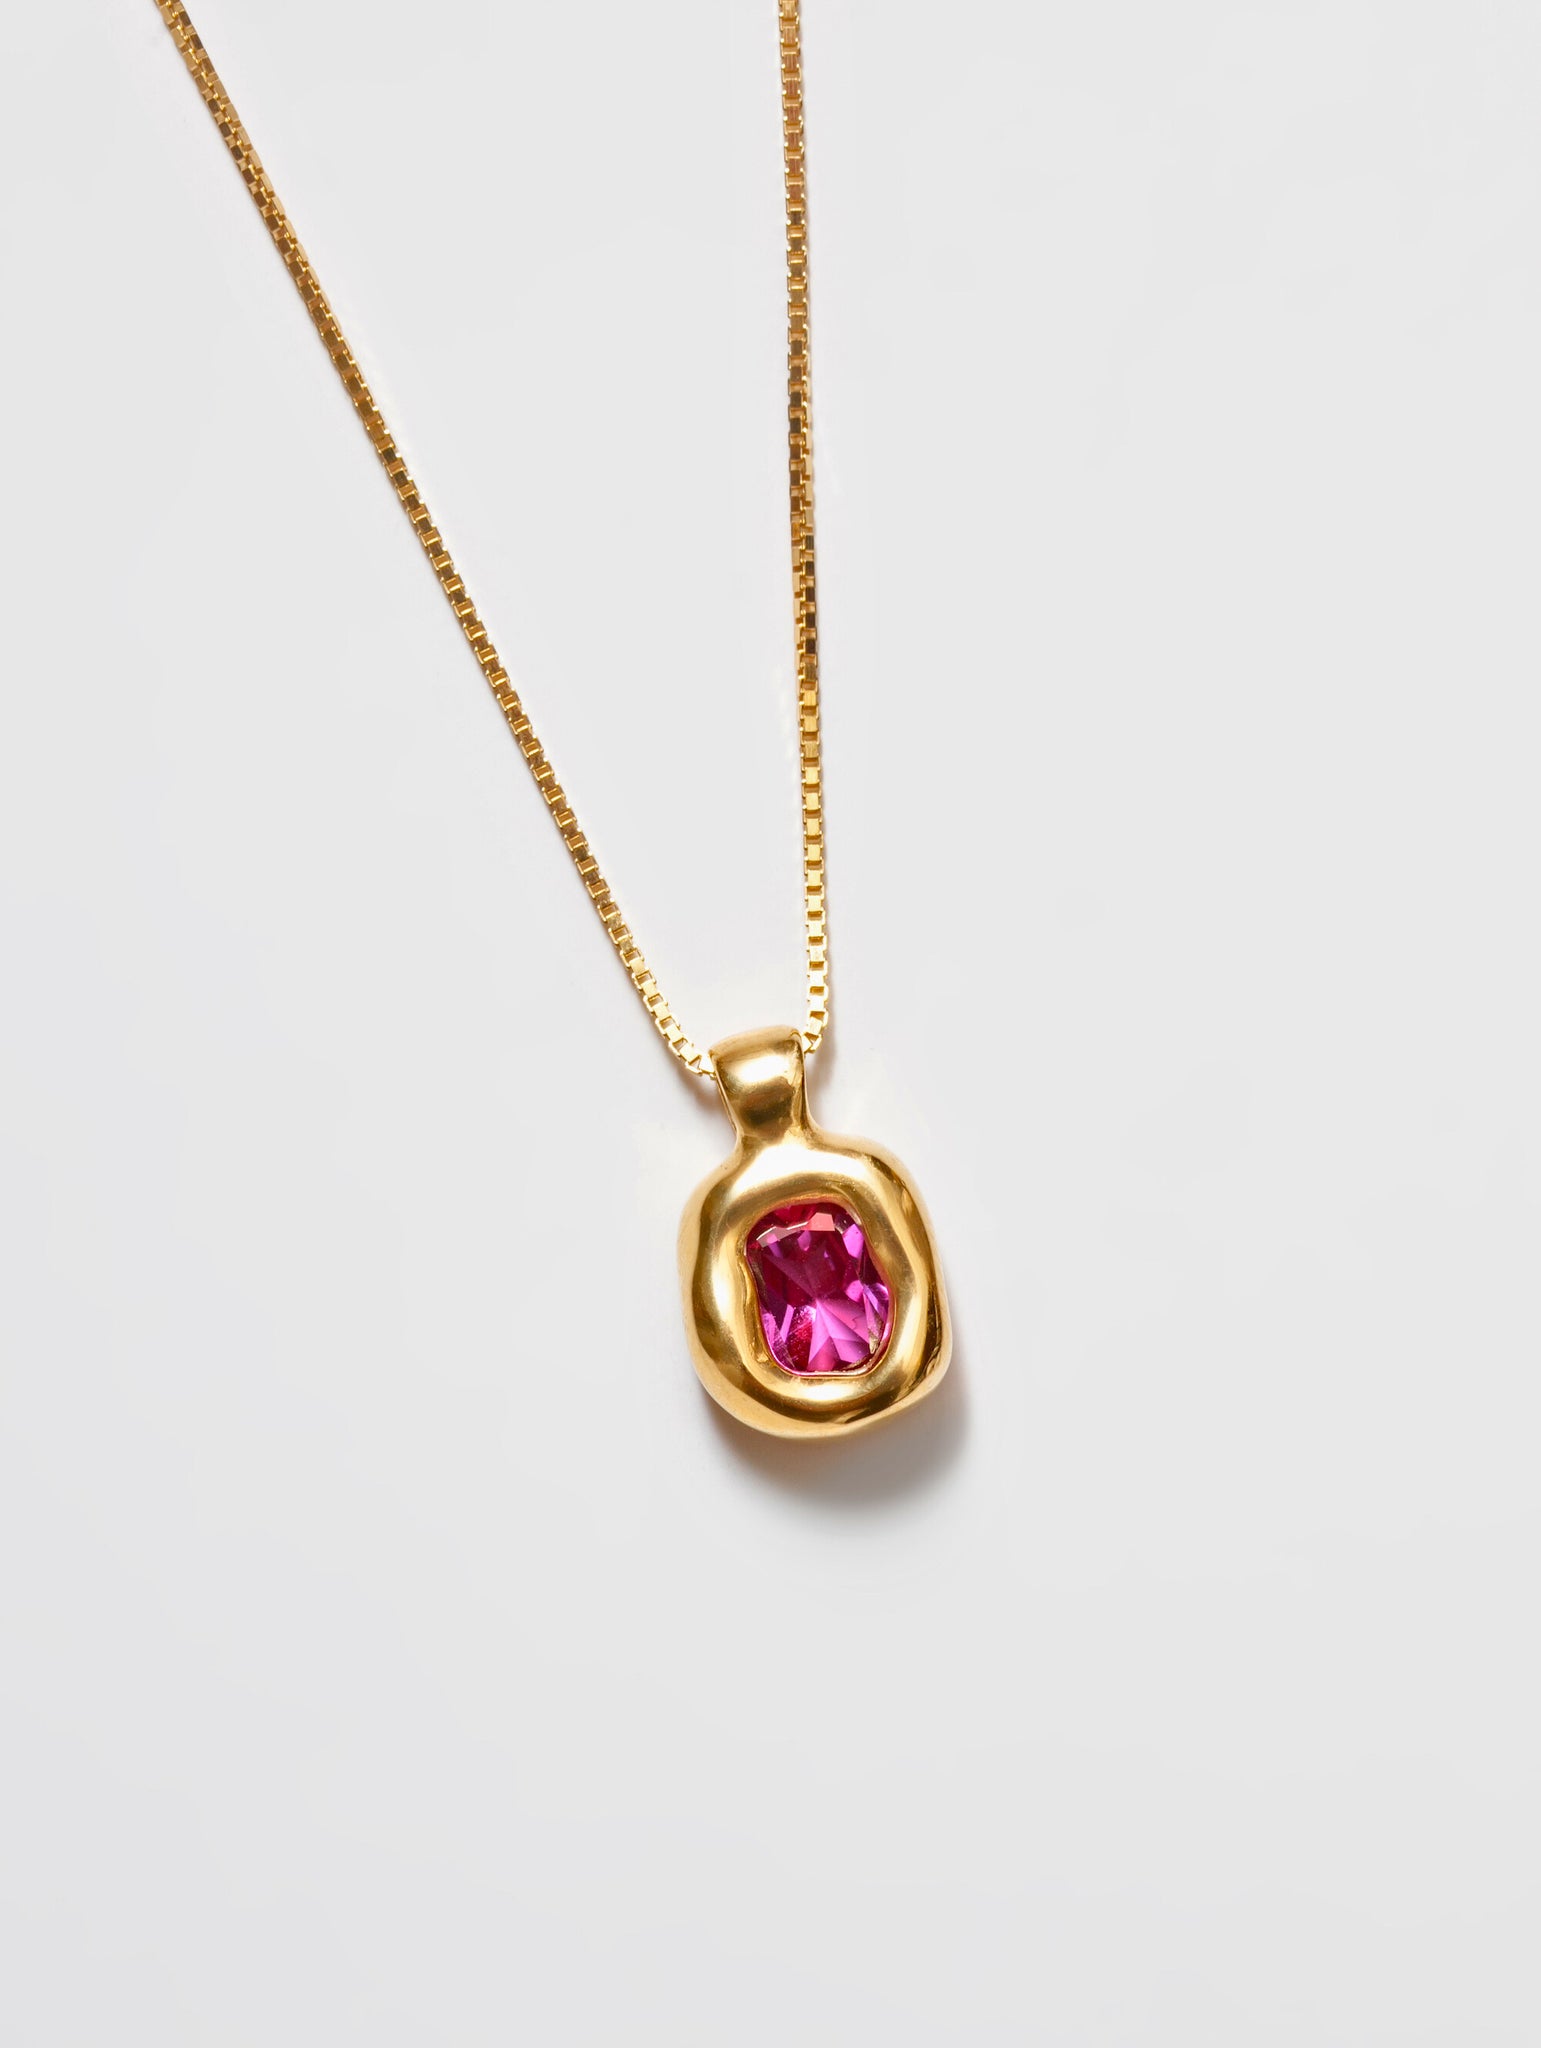 Freya Necklace in Pink and Gold